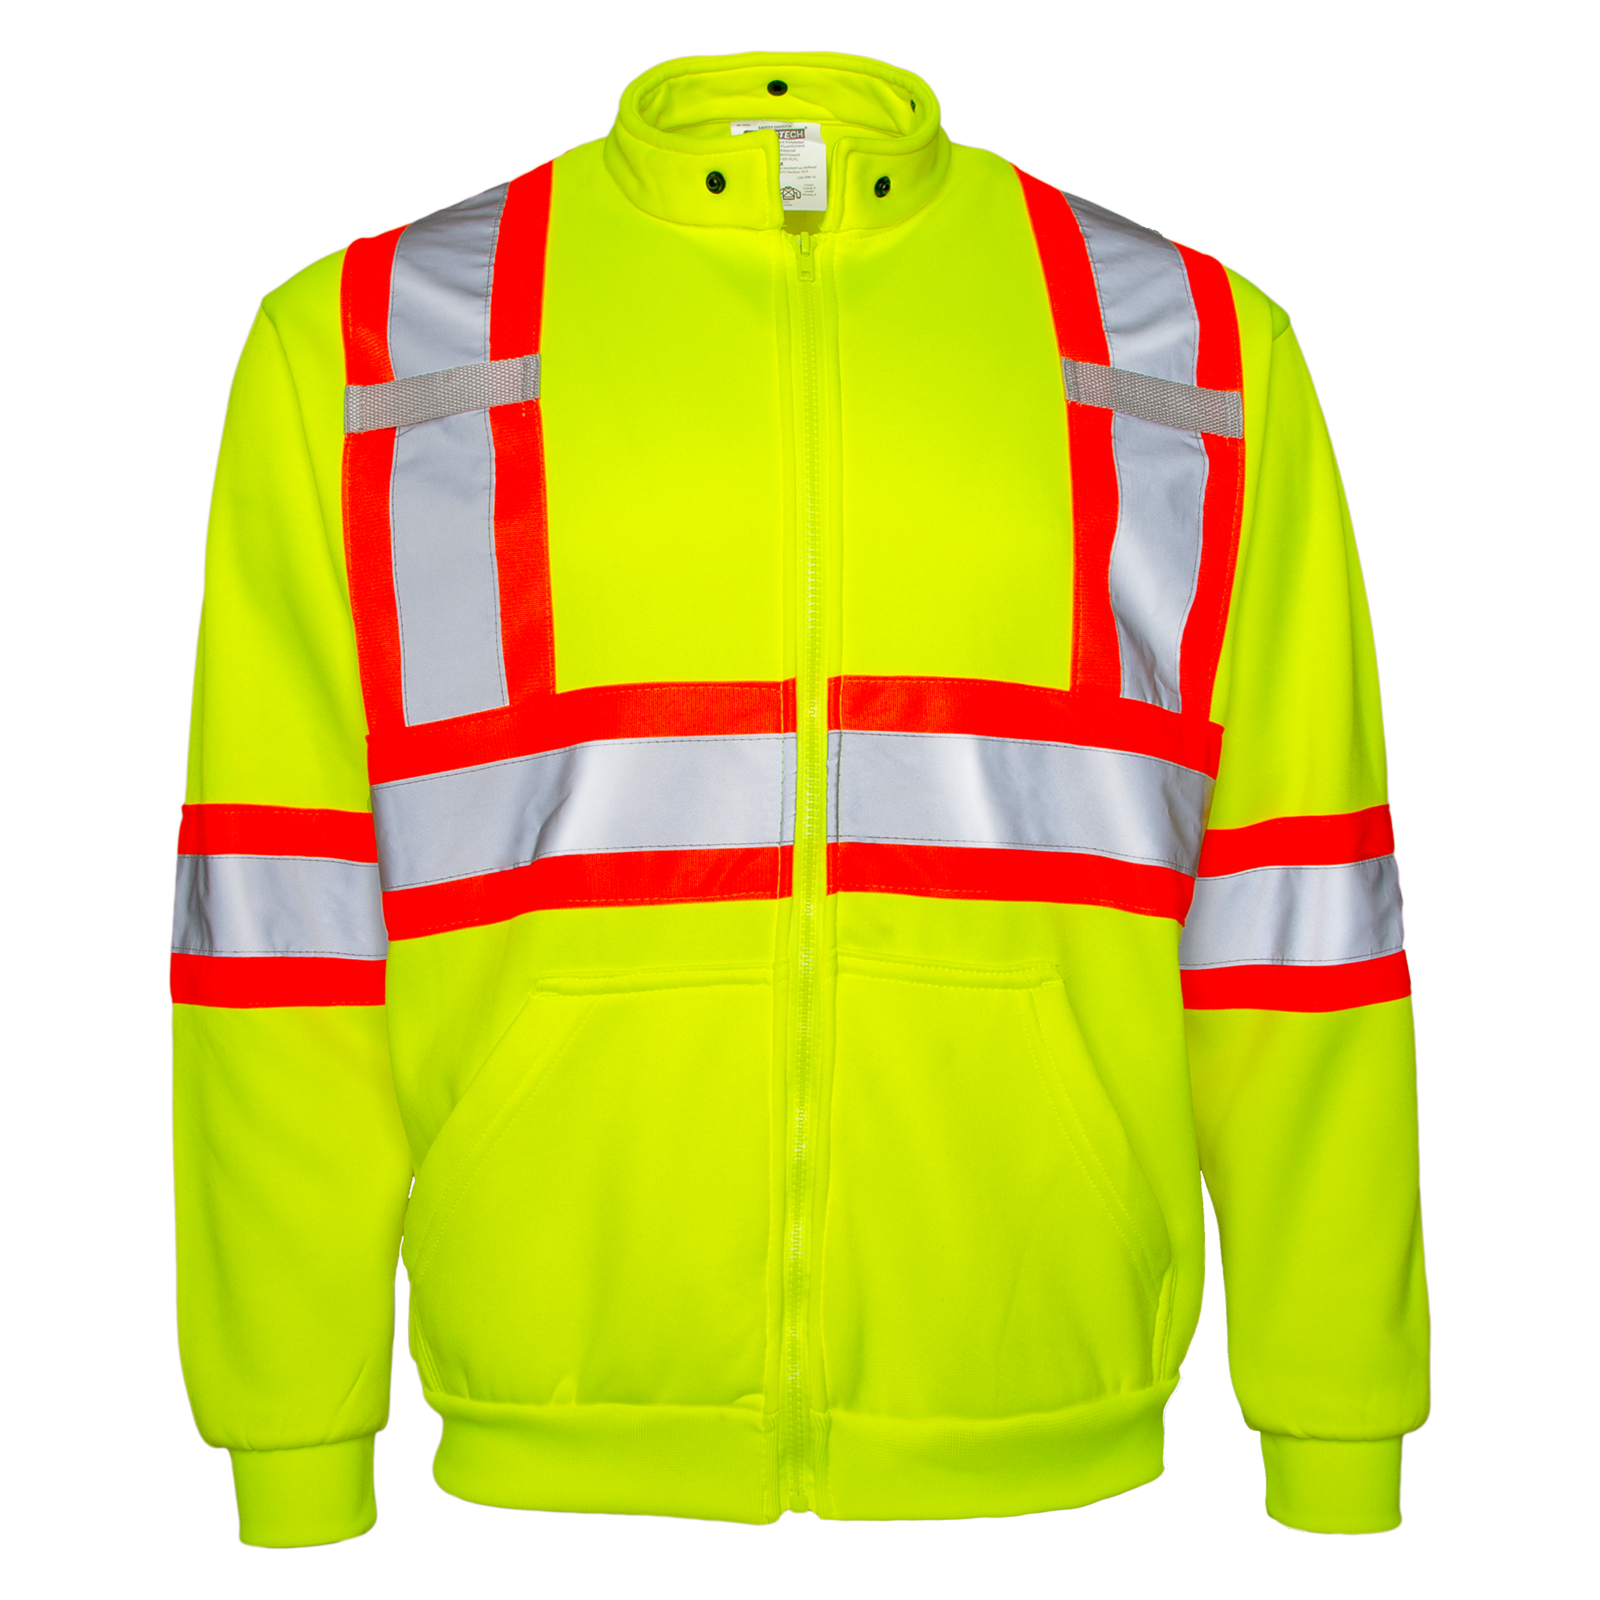 Front view of the yellow JORESTECH hi-vis sweater with reflective stripes and contrasting orange stripes. Sweater with large pocket,  detachable hood, radio tabs and X on the back